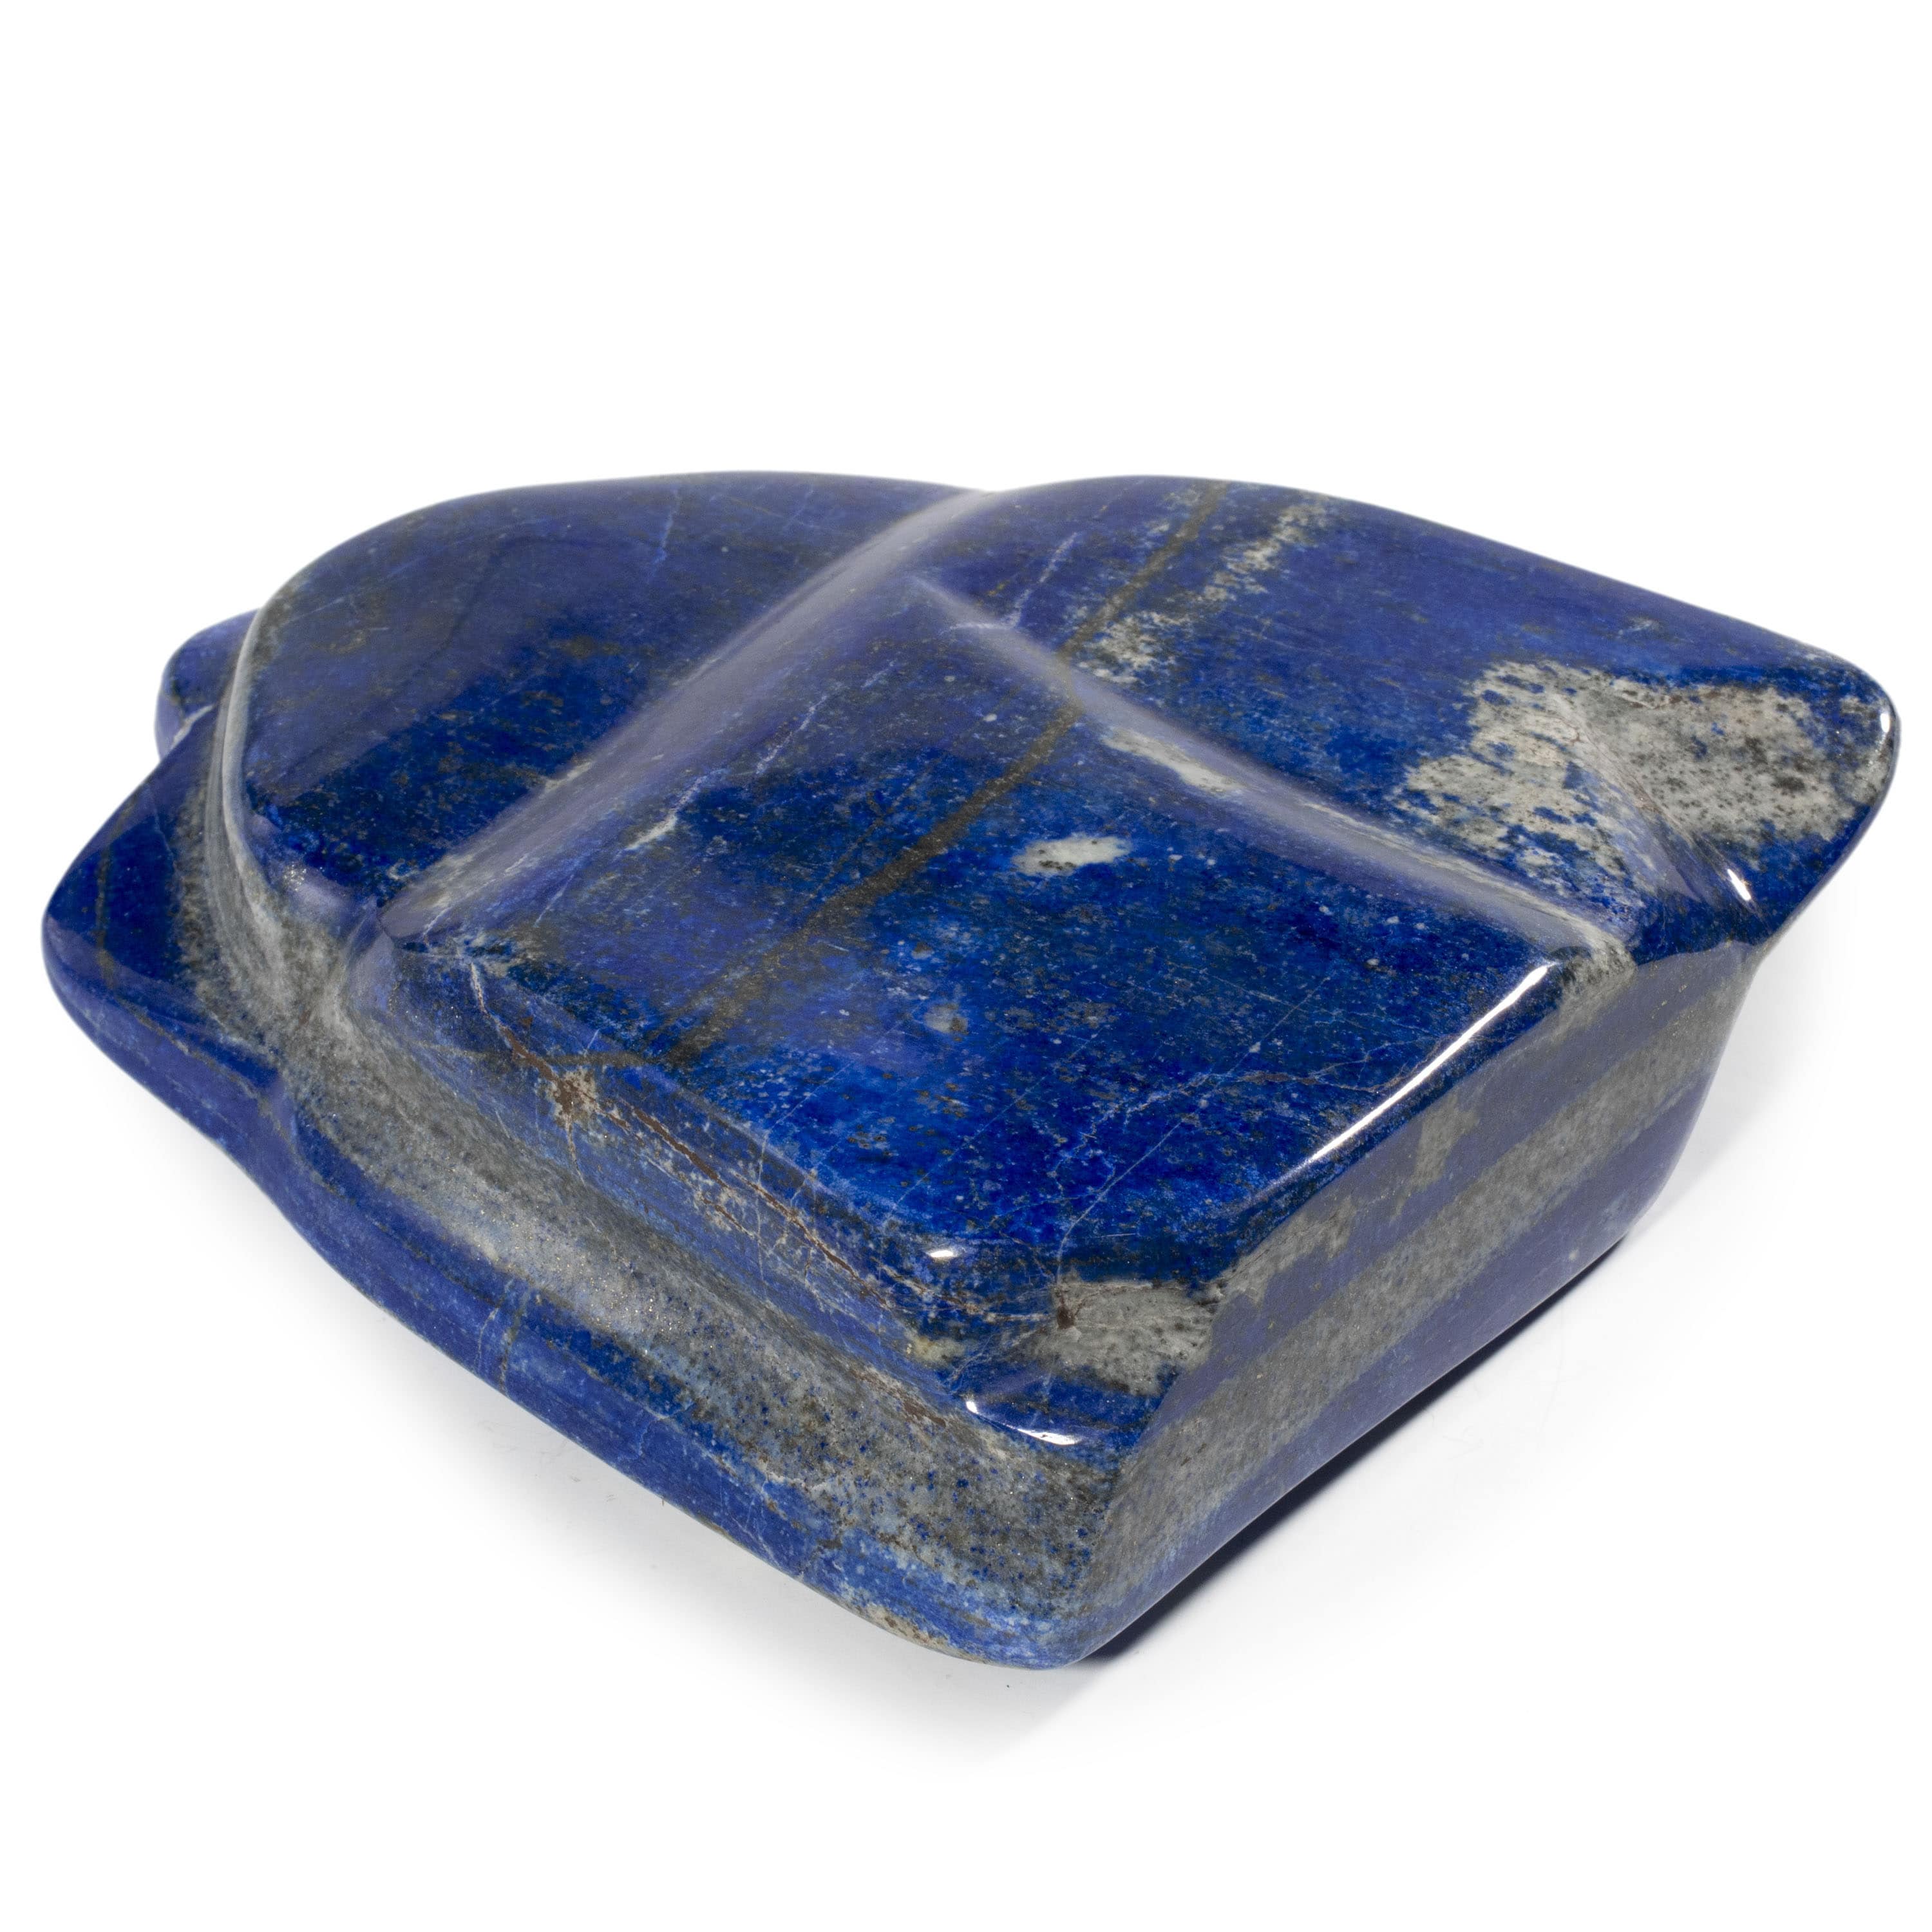 Kalifano Lapis Rare Natural Blue Polished Lapis Lazuli Freeform Carving from Afghanistan - 2440 g / 5.4 lbs LPS2500.001